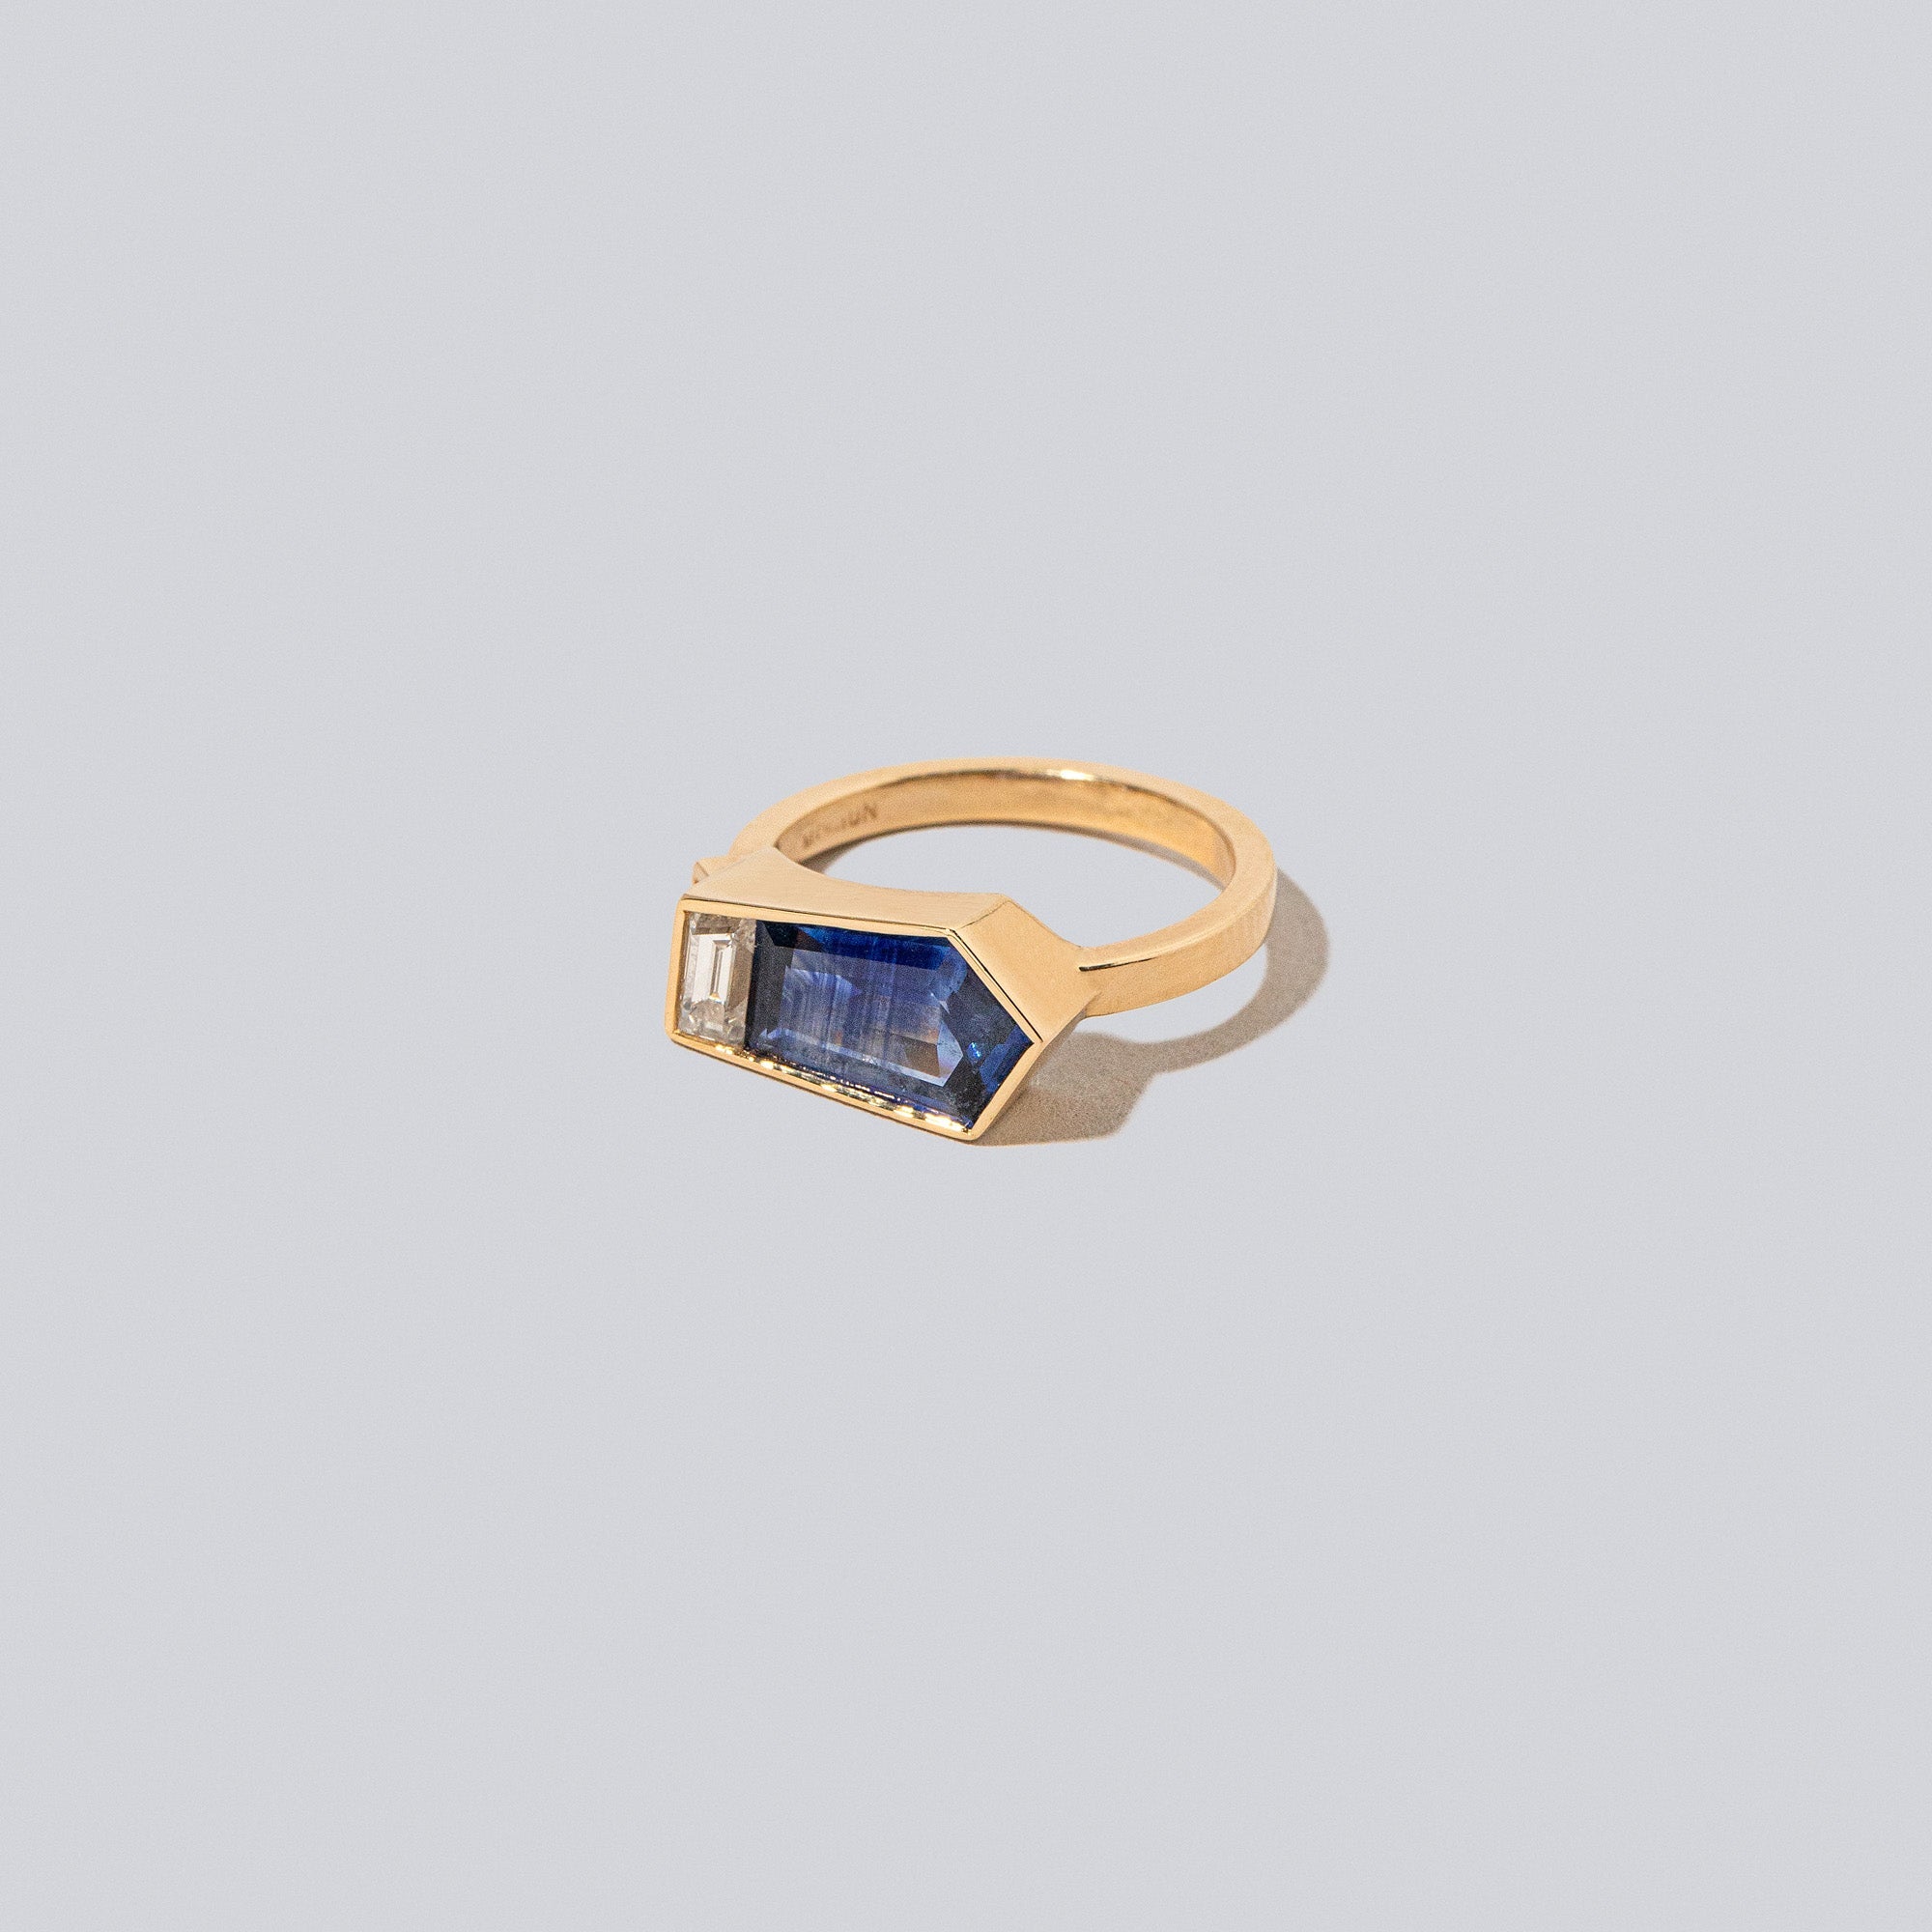 product_details::Pond Ring on light colored background.